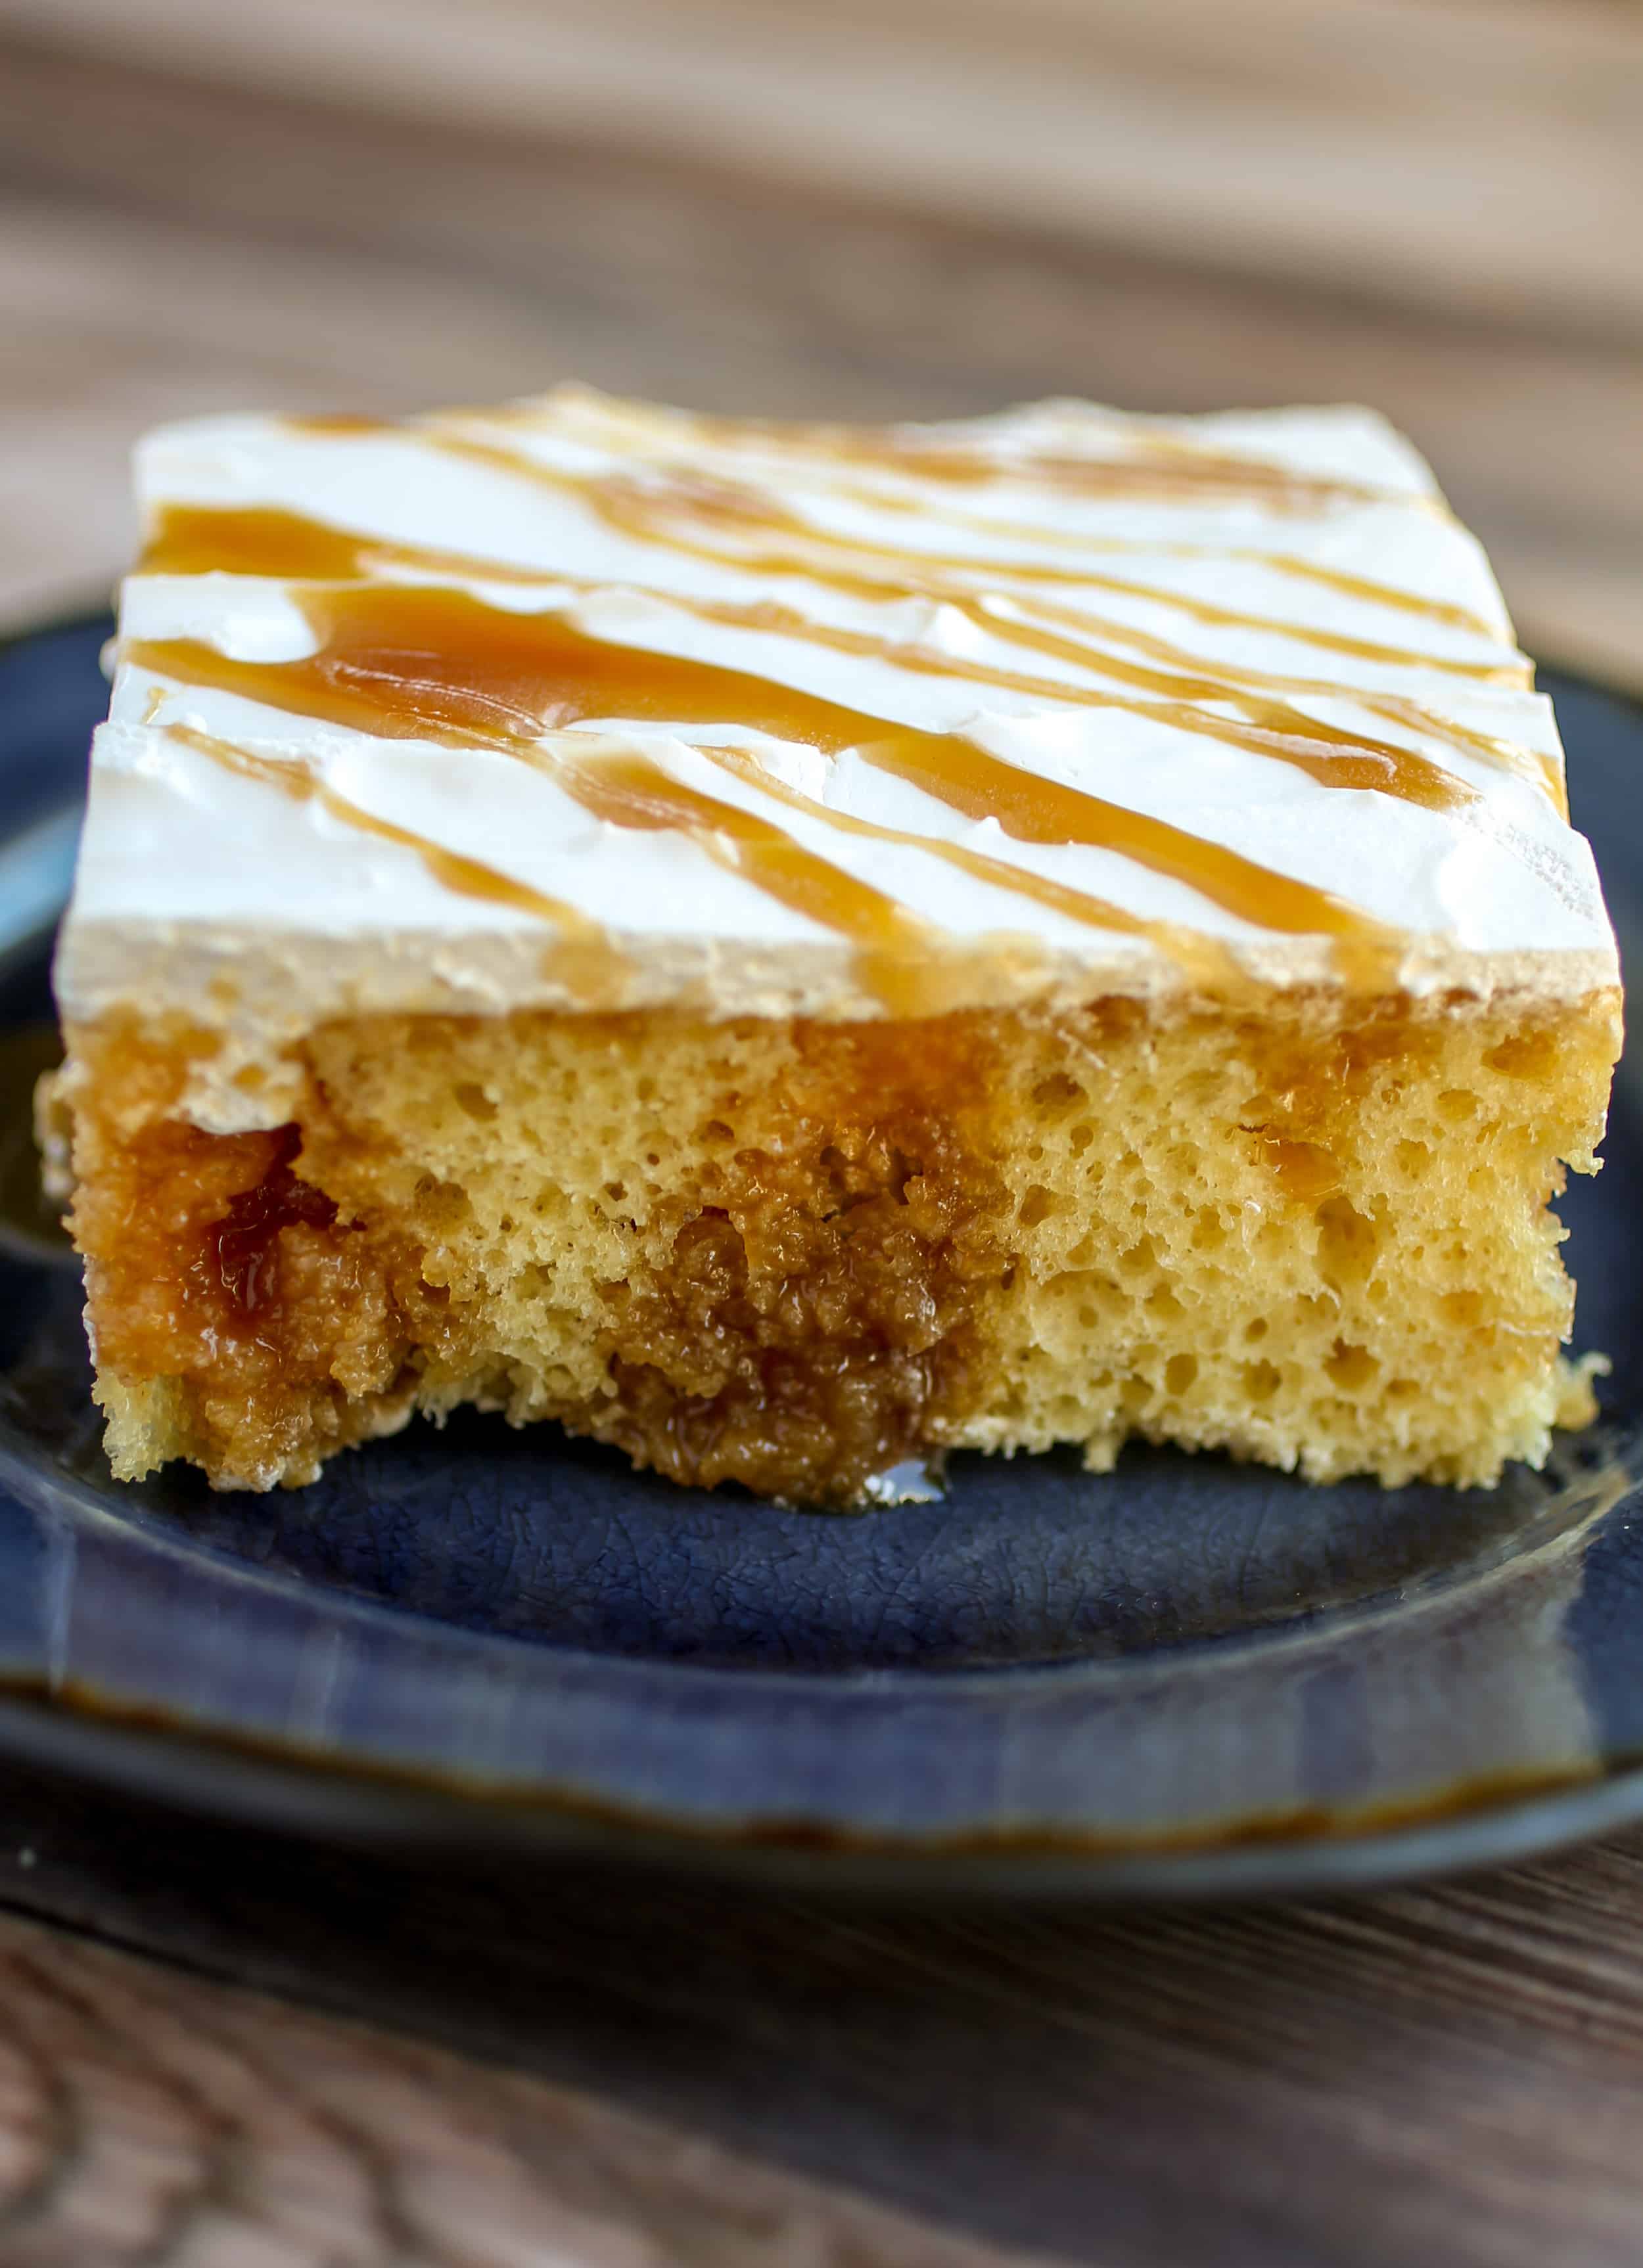 Caramel Poke Cake - Light and fluffy yellow cake filled with gooey caramel and topped with a sweet whipped topping!